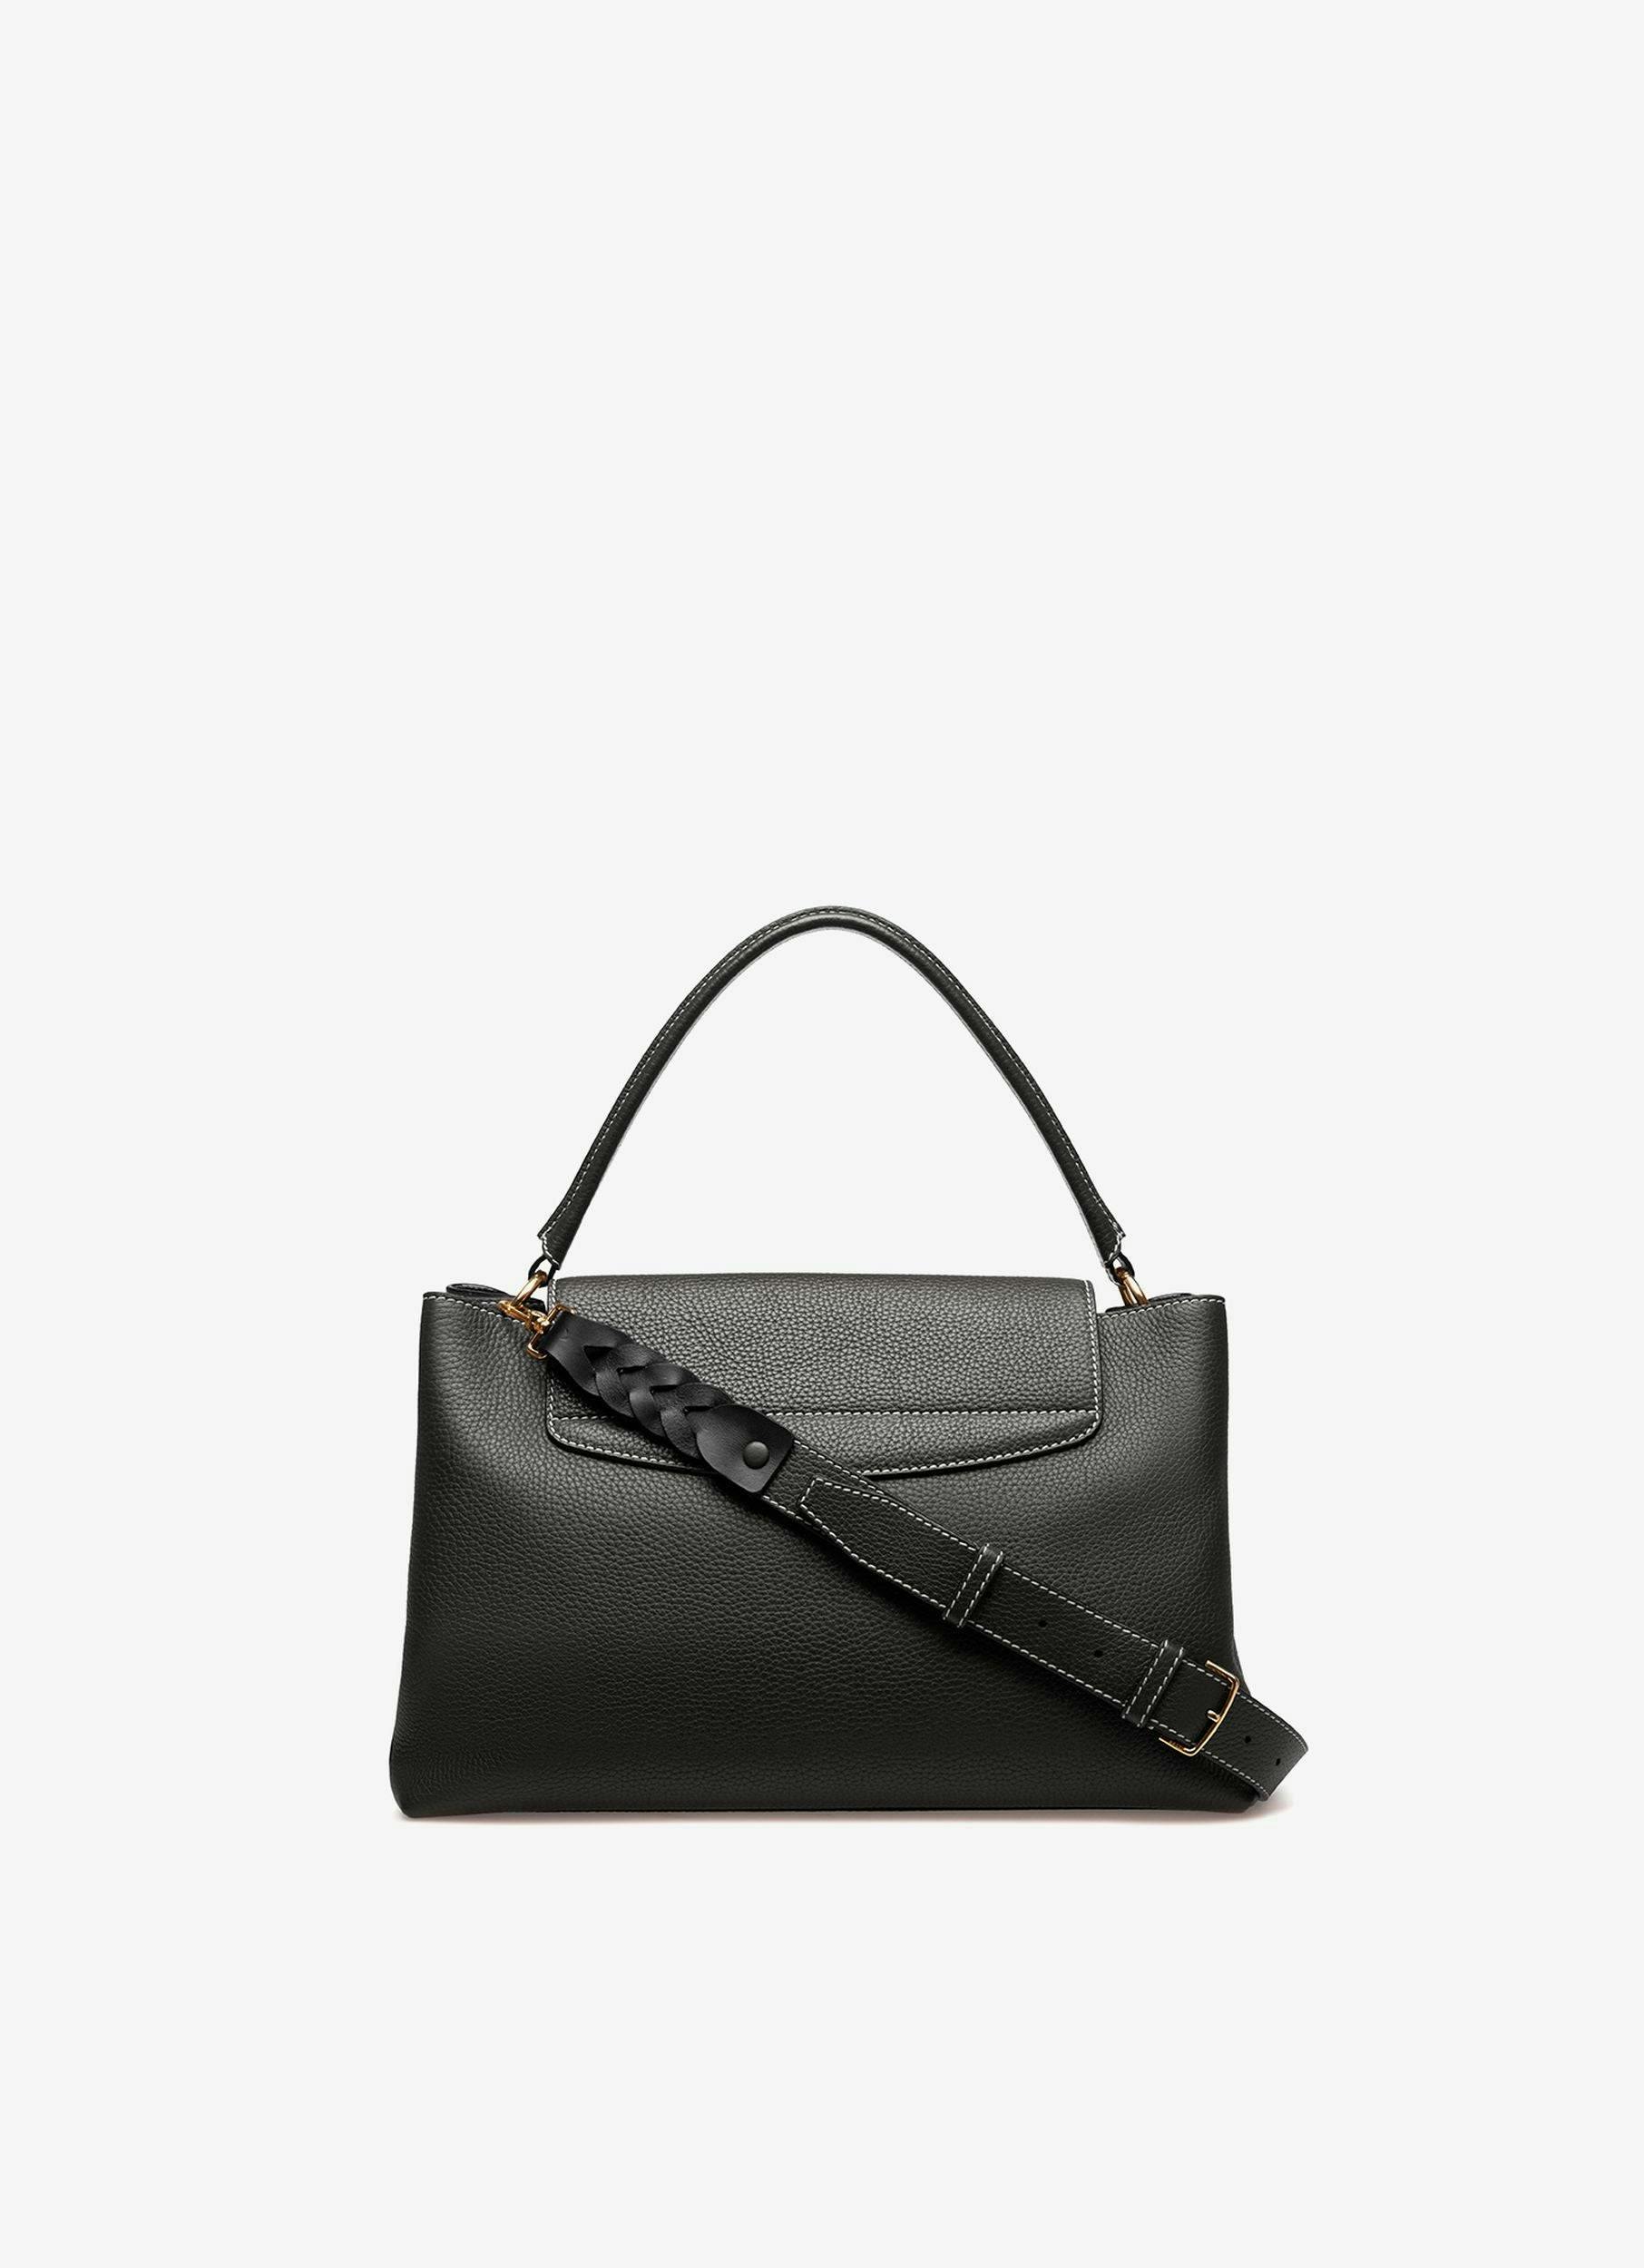 Women's Lock Me Top Handle Bag In Black Leather | Bally | Still Life Back